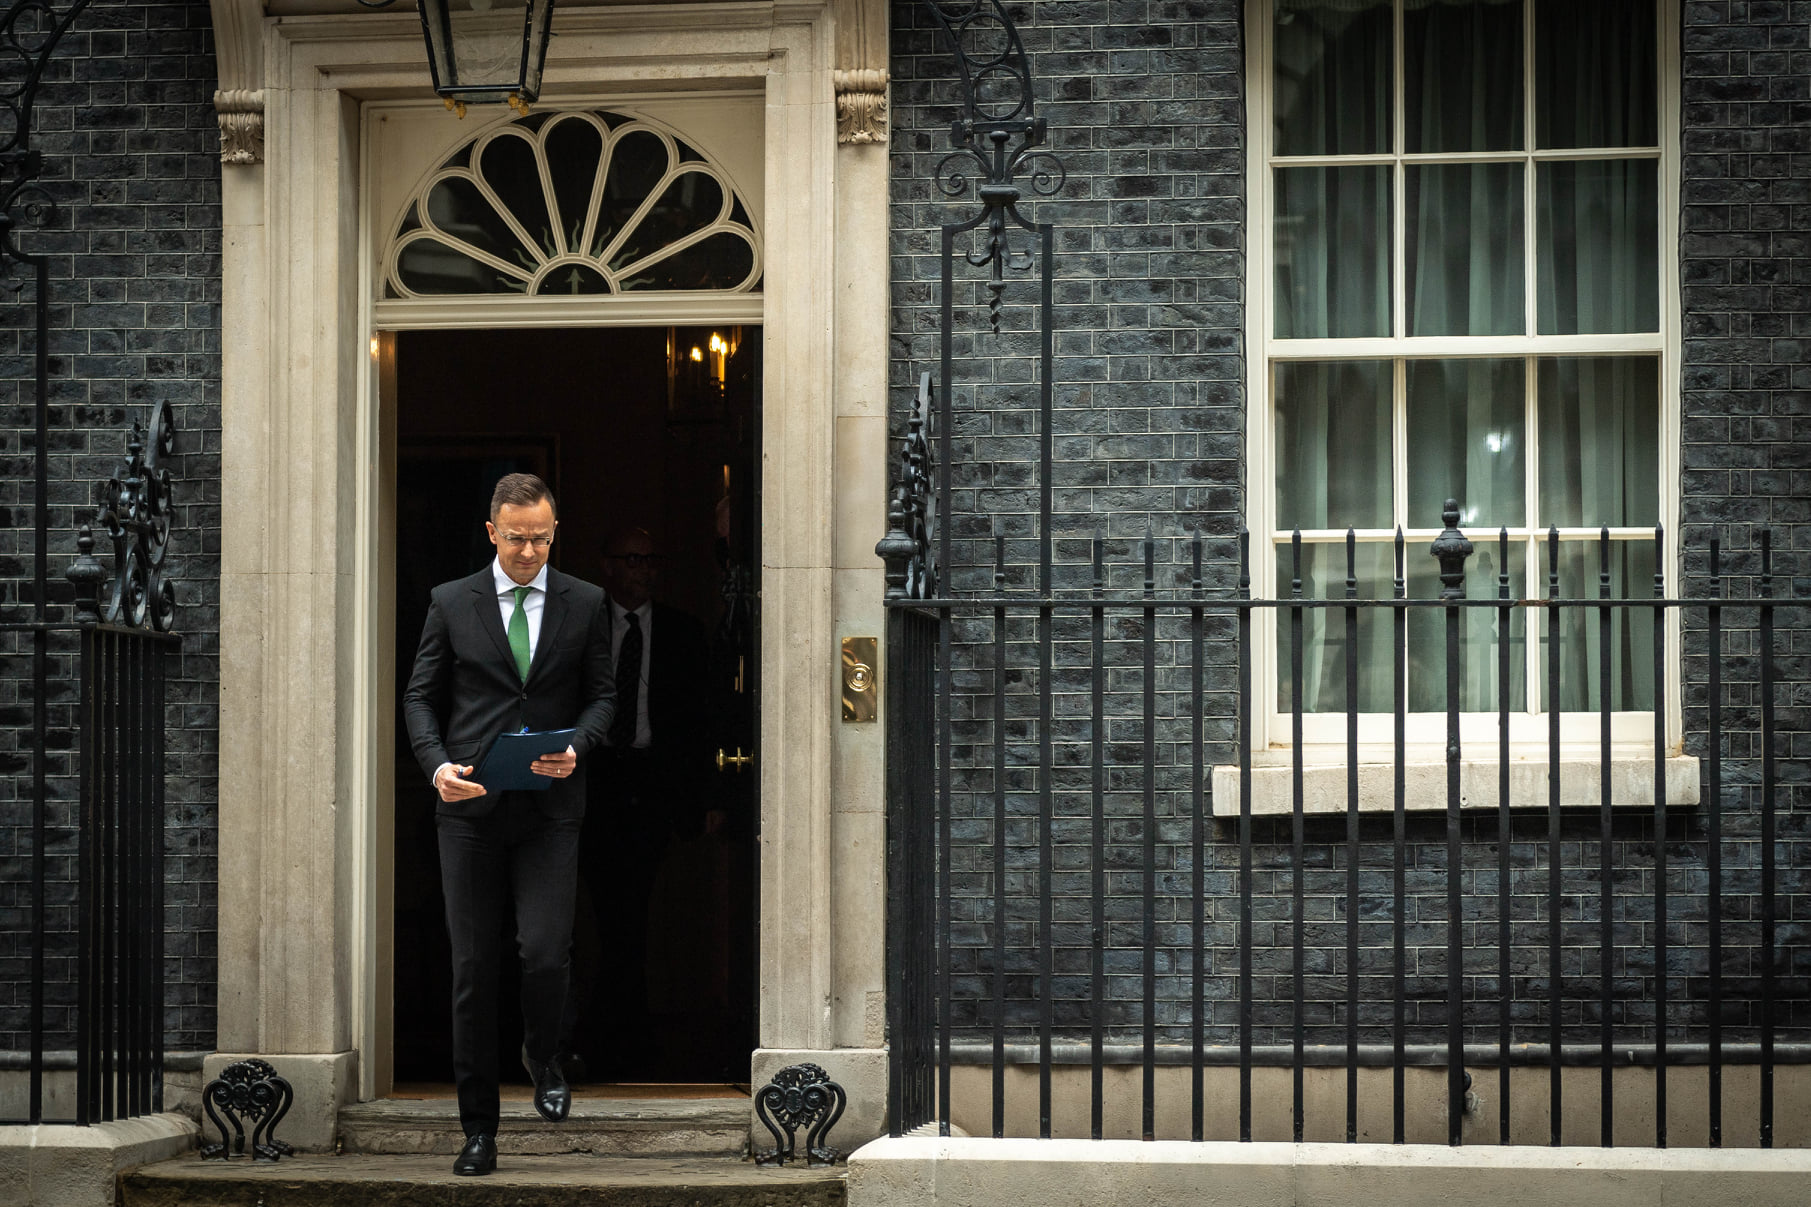 FM Szijjártó: All Agreements in Place for Post-Brexit Cooperation With UK